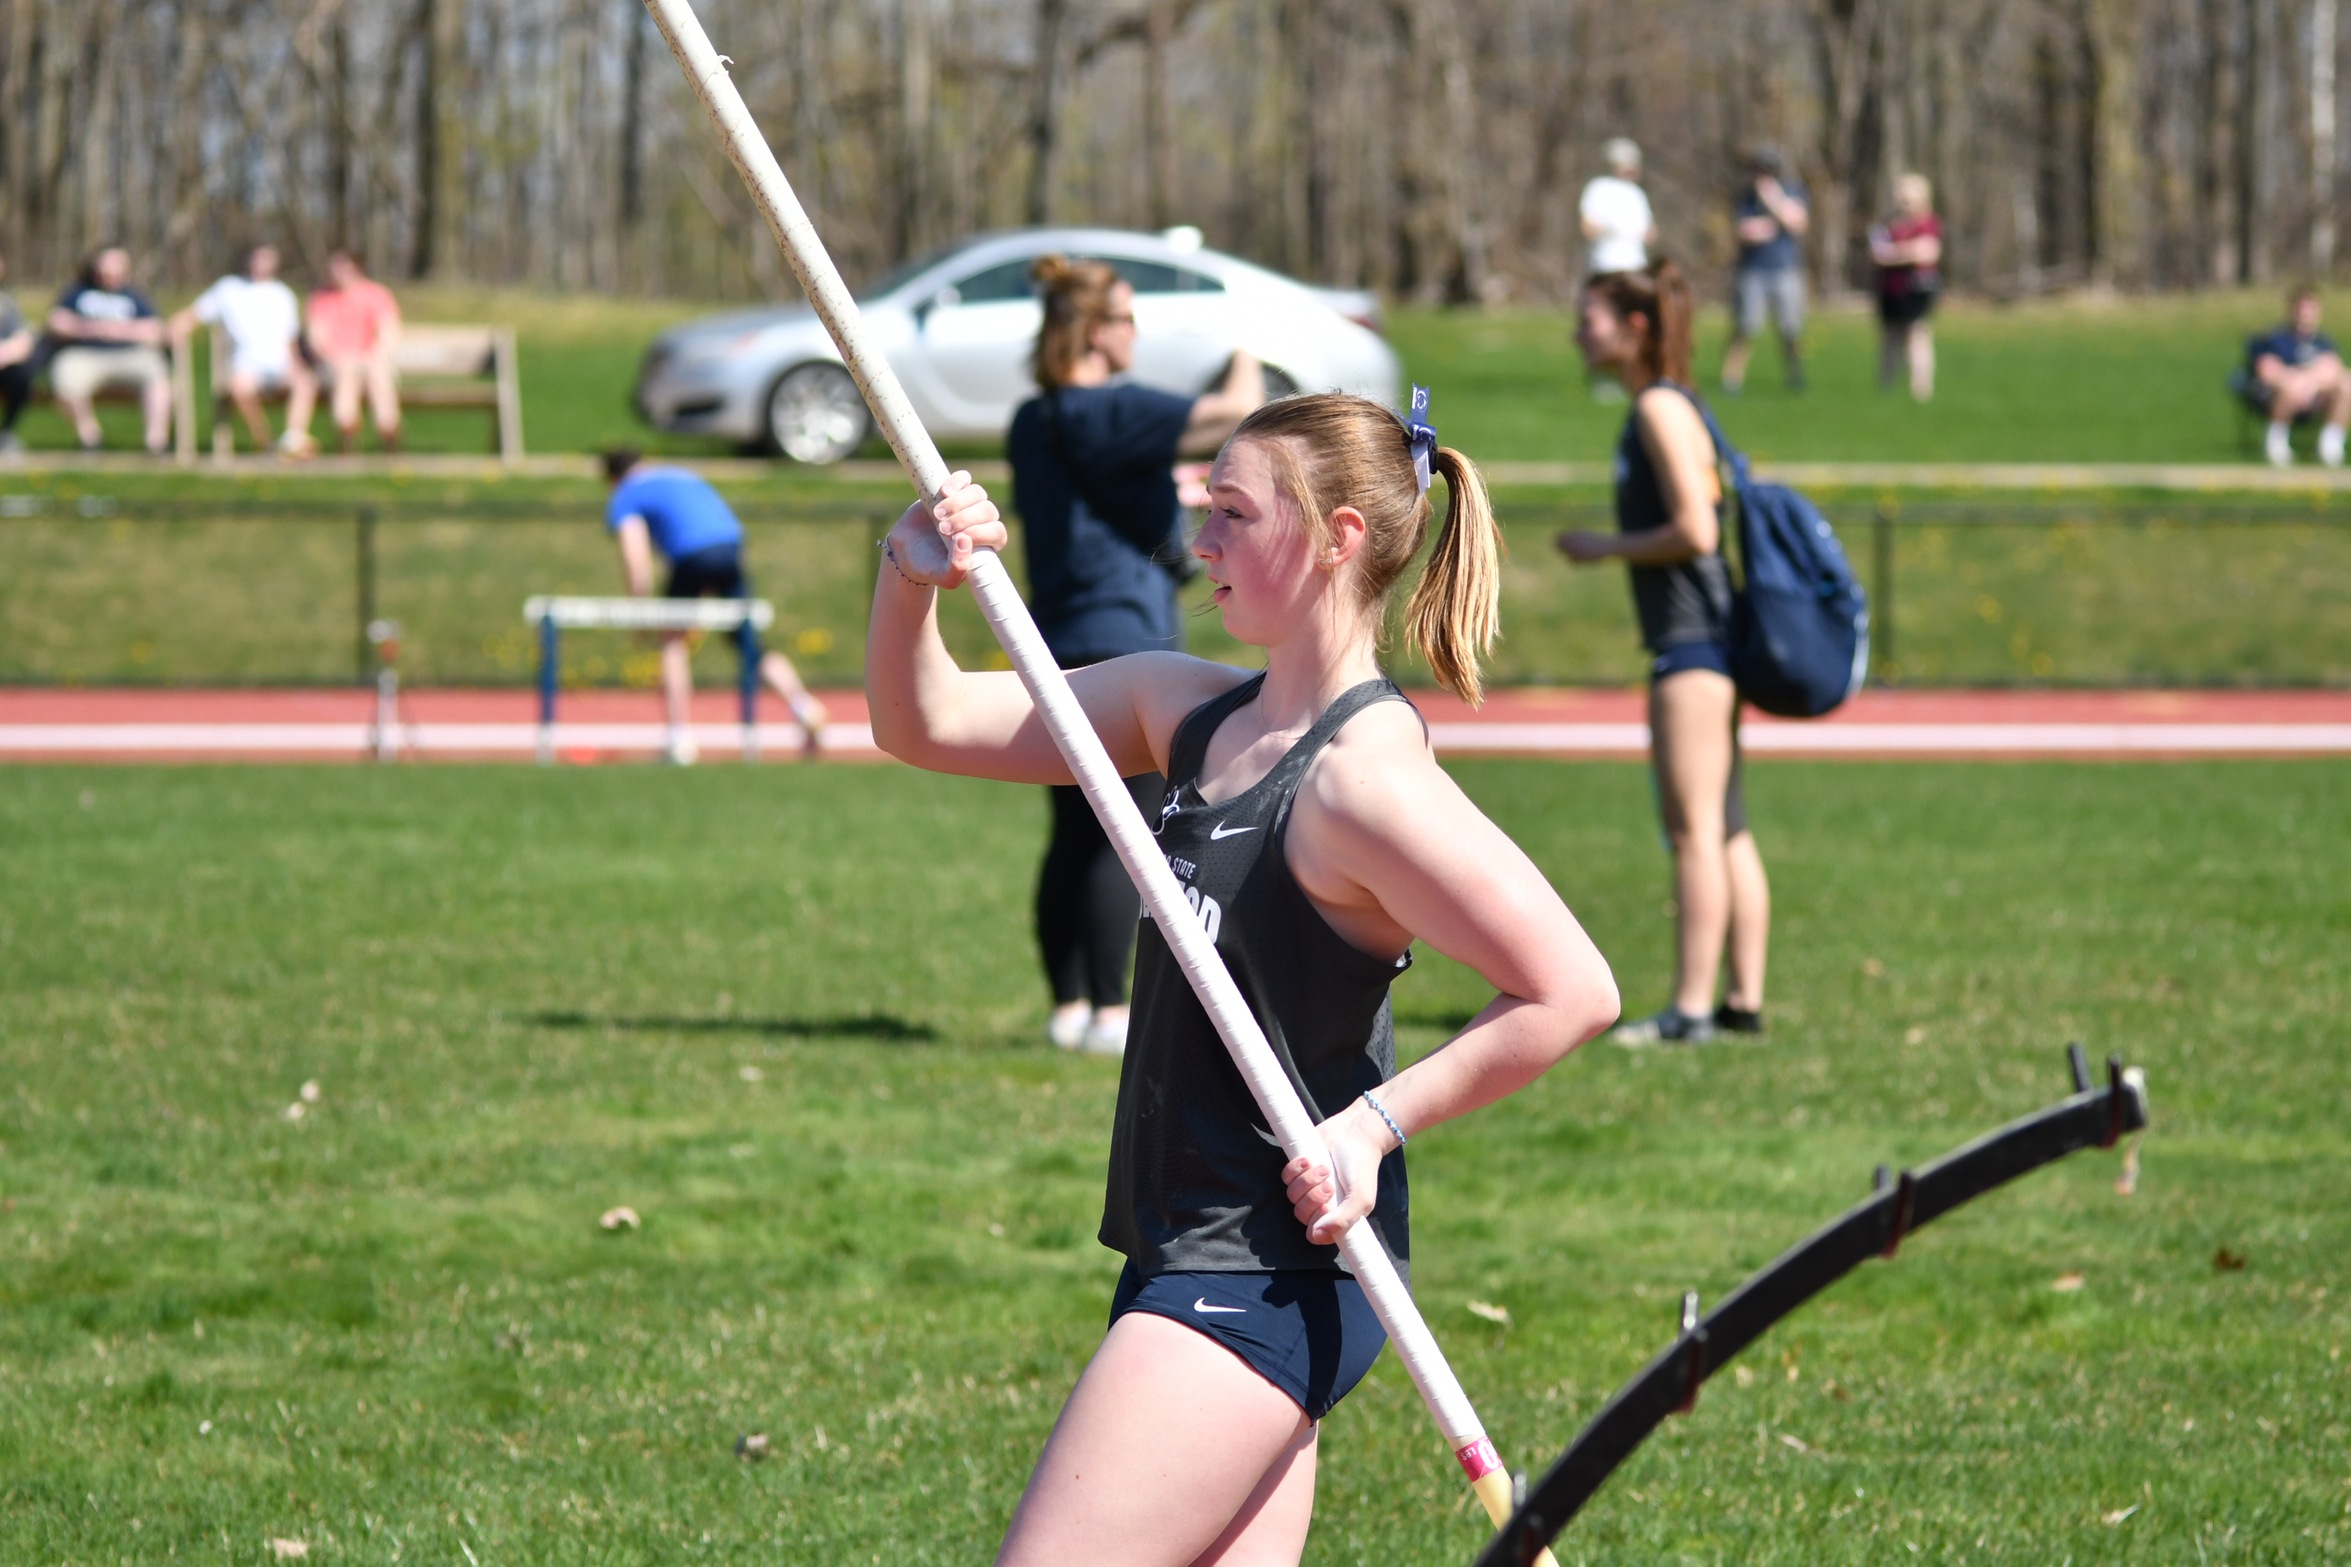 Kappeler Wins Four Events at Behrend Invitational